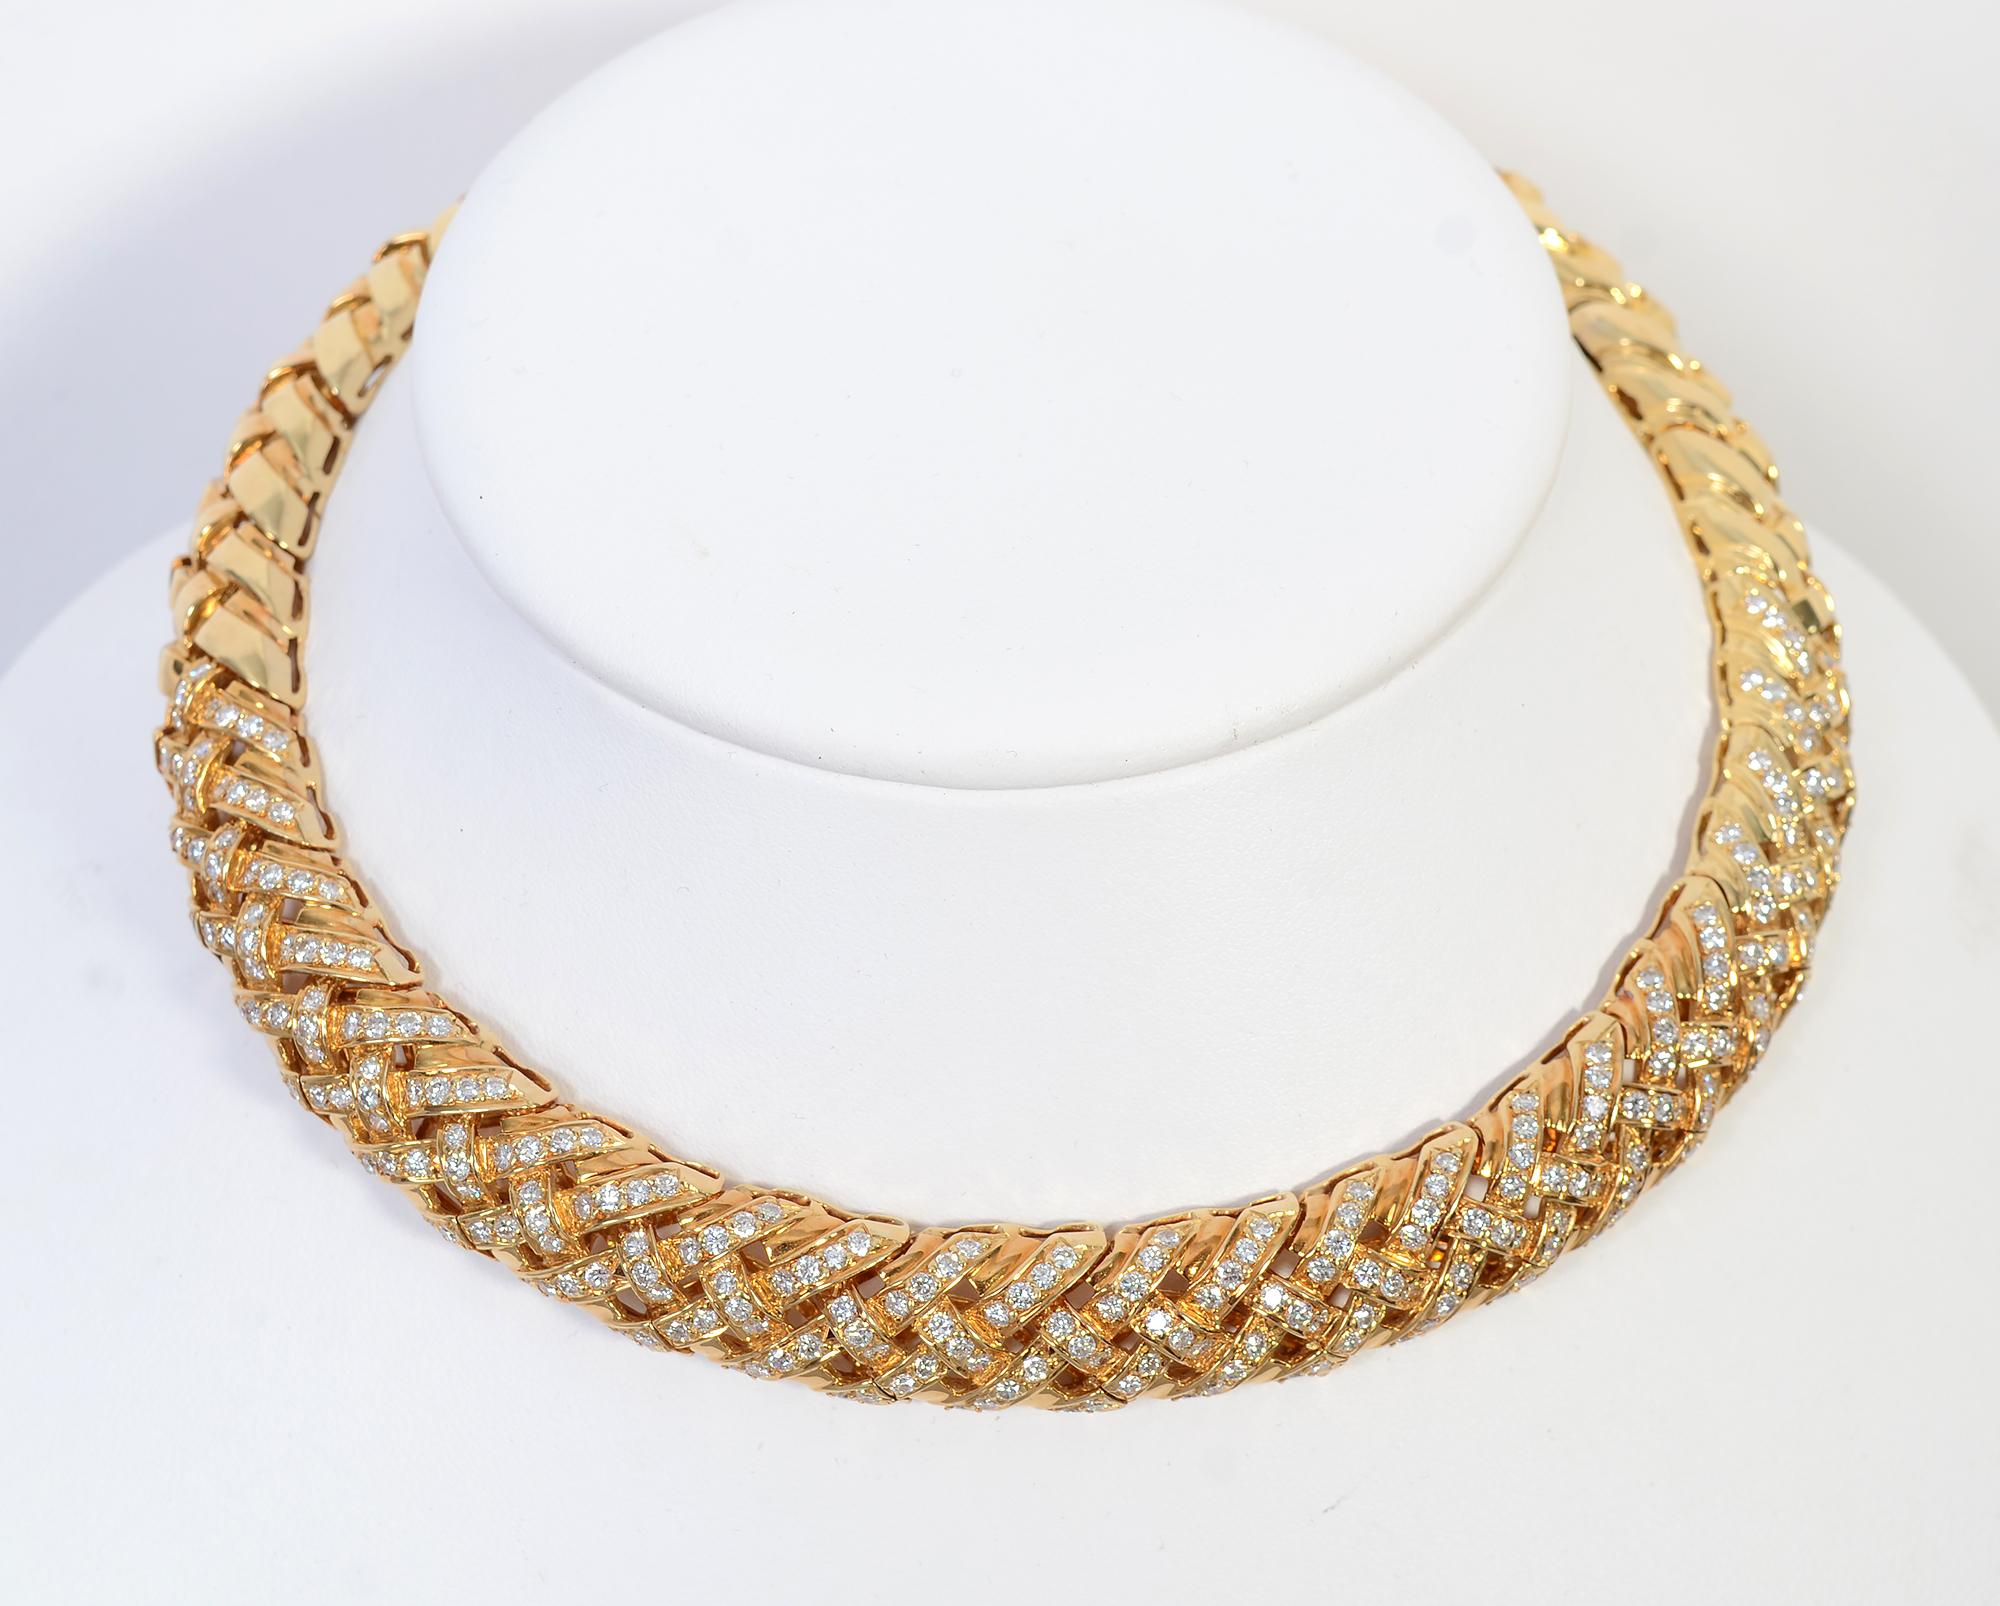 This elegant choker necklace was made by New York bespoke jeweler, Jerry Blickman. The firm has been in business since 1946 and is known for the exceptional quality of their designs and gems.
This 18 karat latticework design choker is studded with